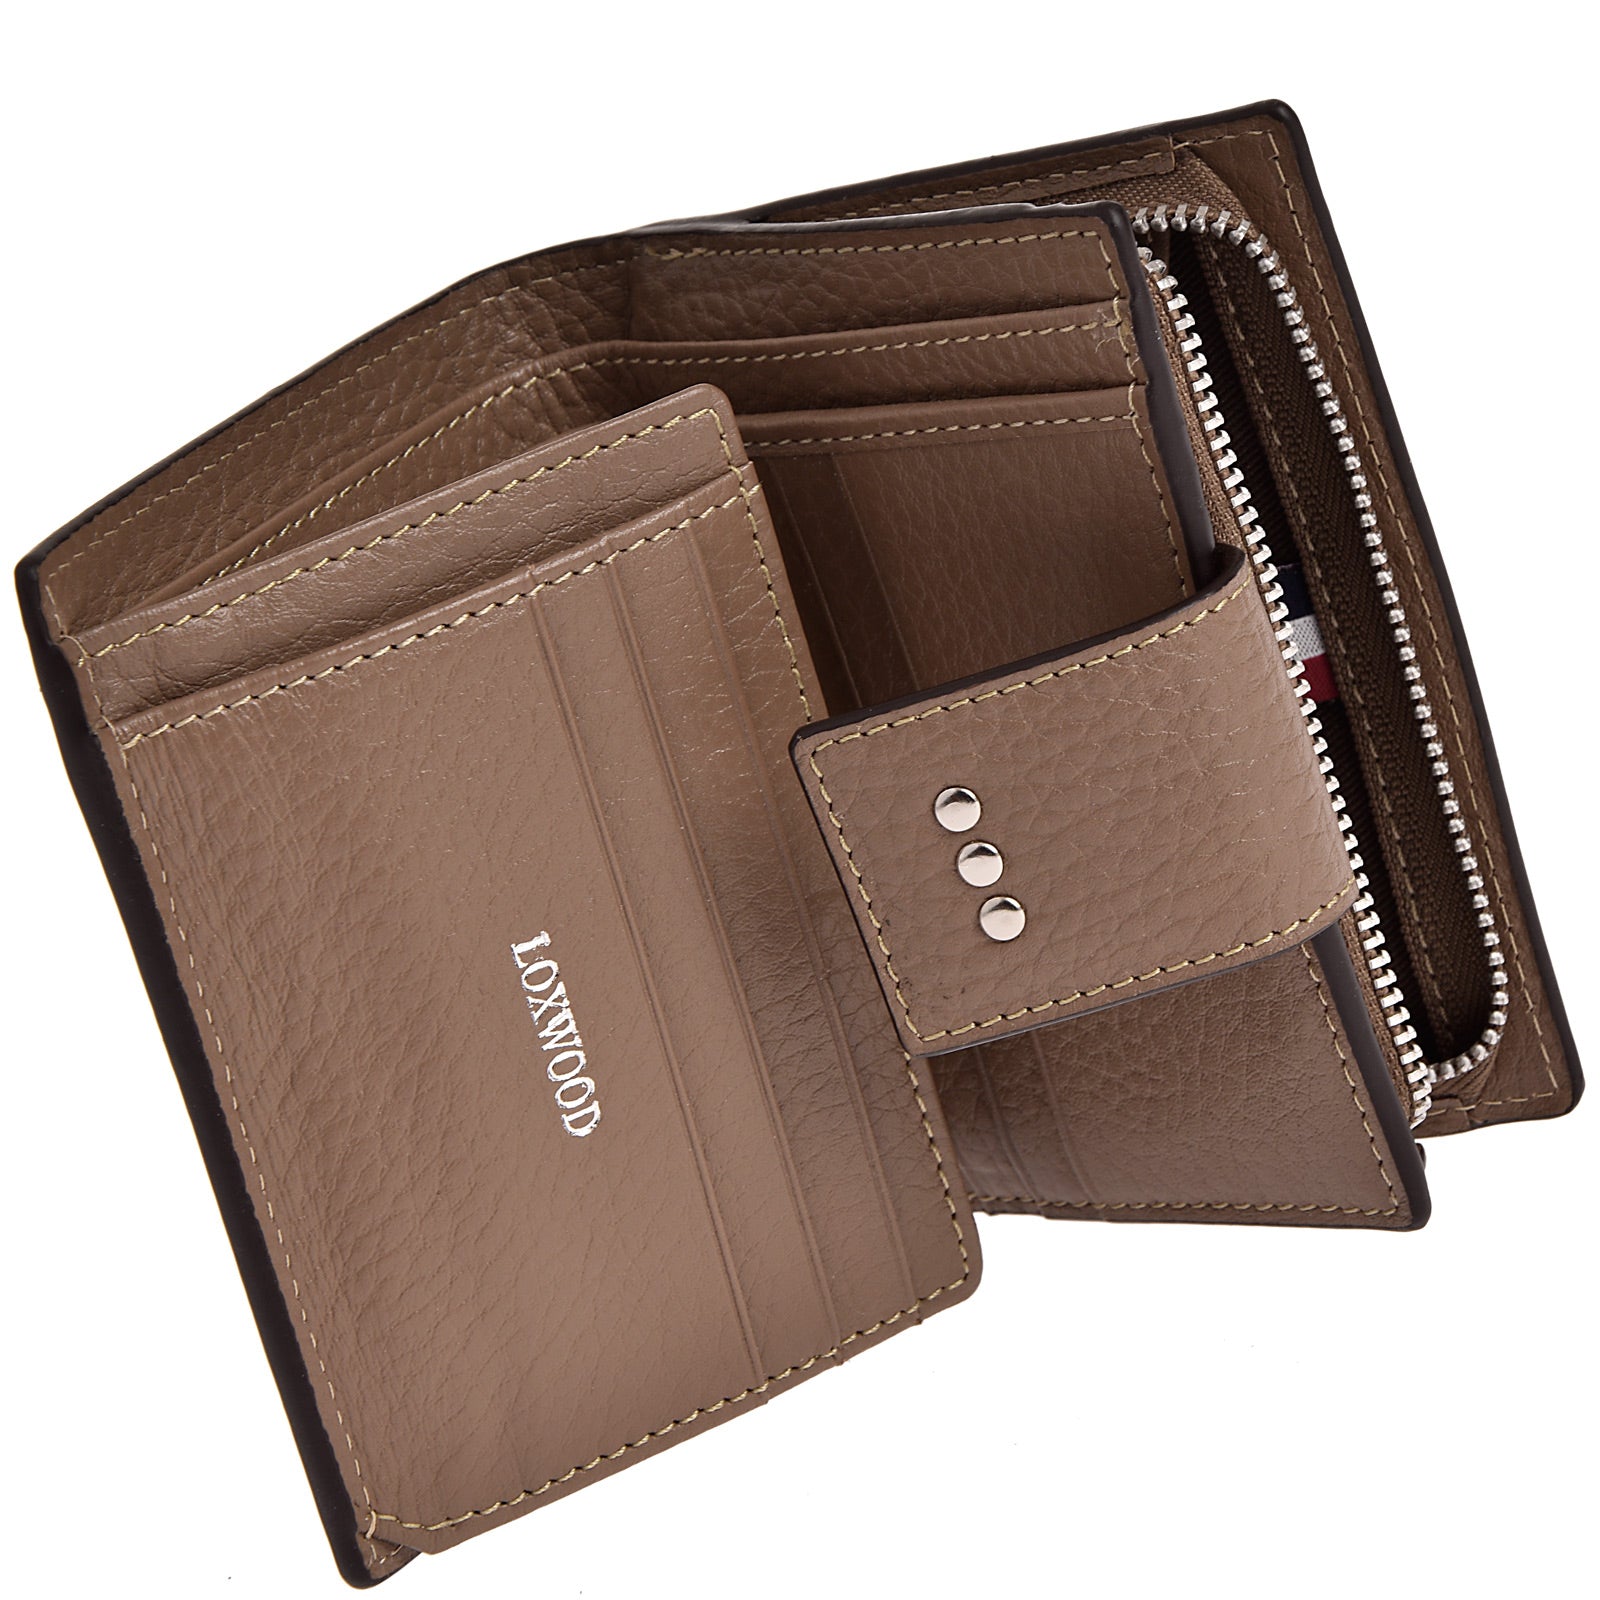 SMALL BACK TO BACK WALLET - Grained leather